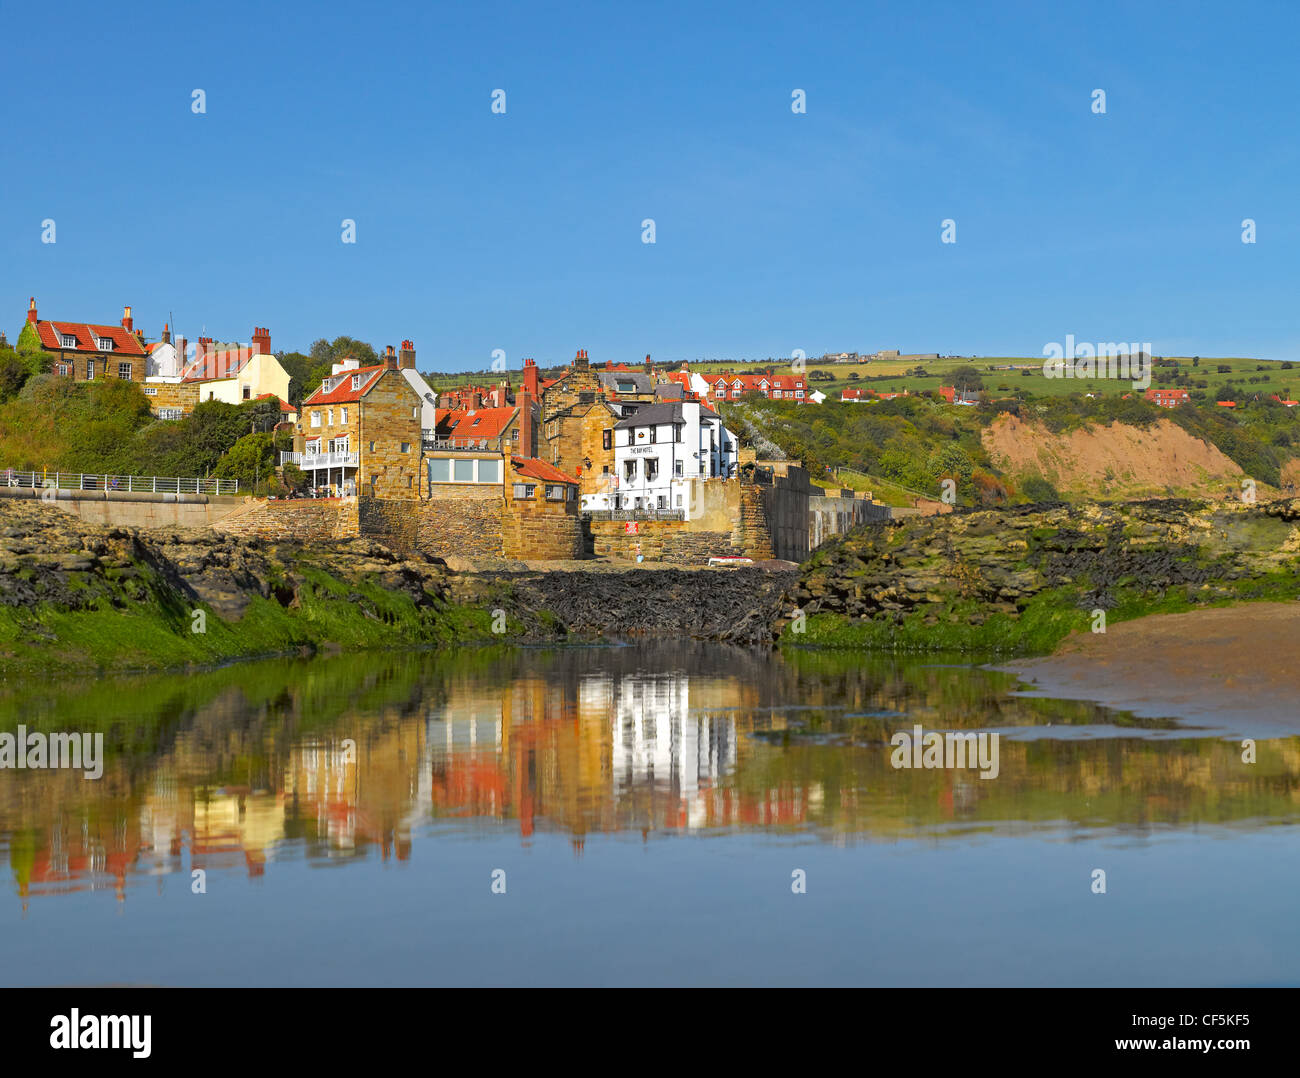 Reflections in a pool of water on the beach at Robin Hoods Bay, the busiest smuggling community on the Yorkshire coast during th Stock Photo